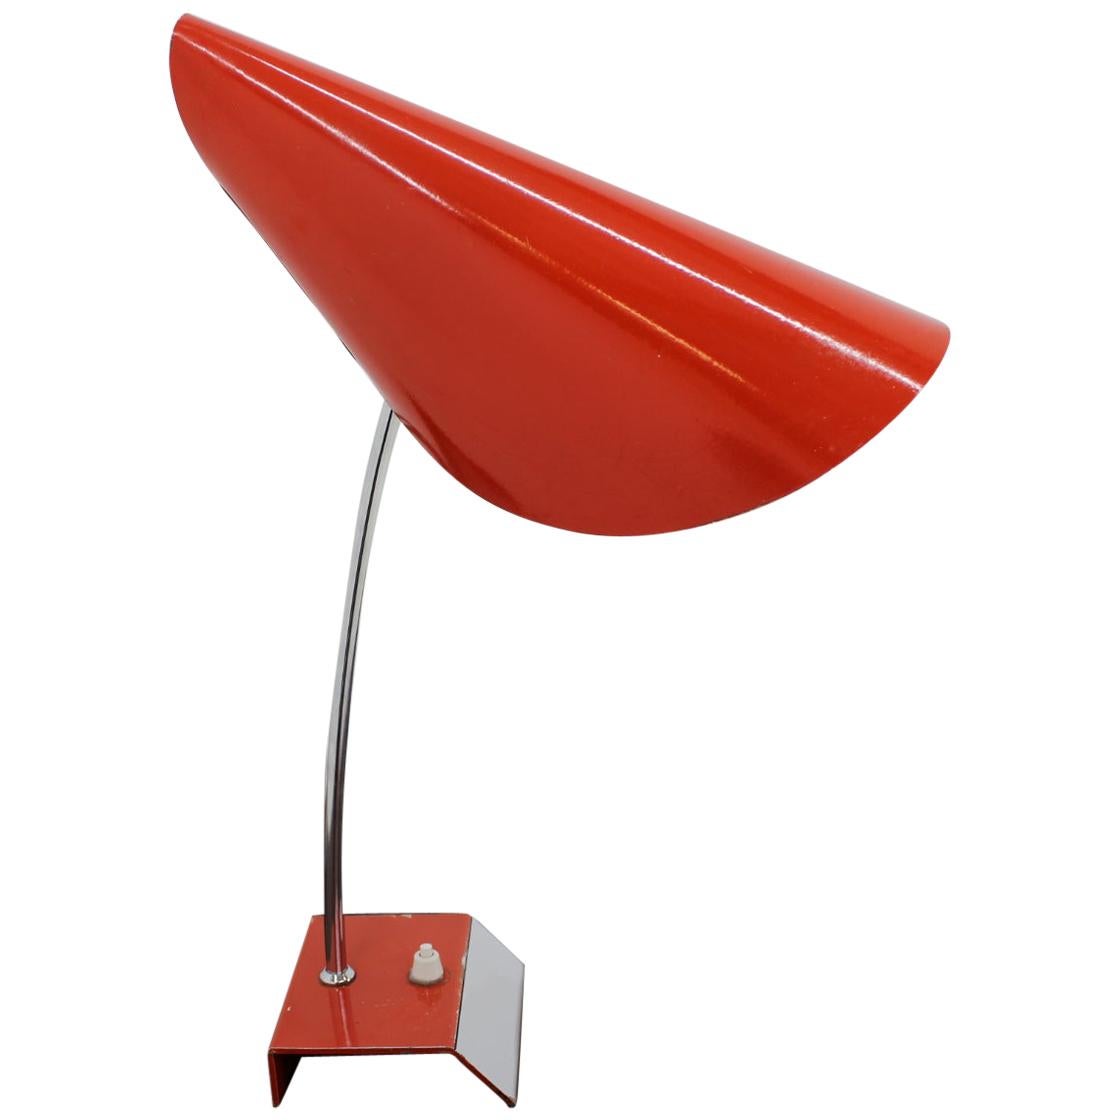 Midcentury Red Table Lamp, Josef Hurka, 1950s For Sale